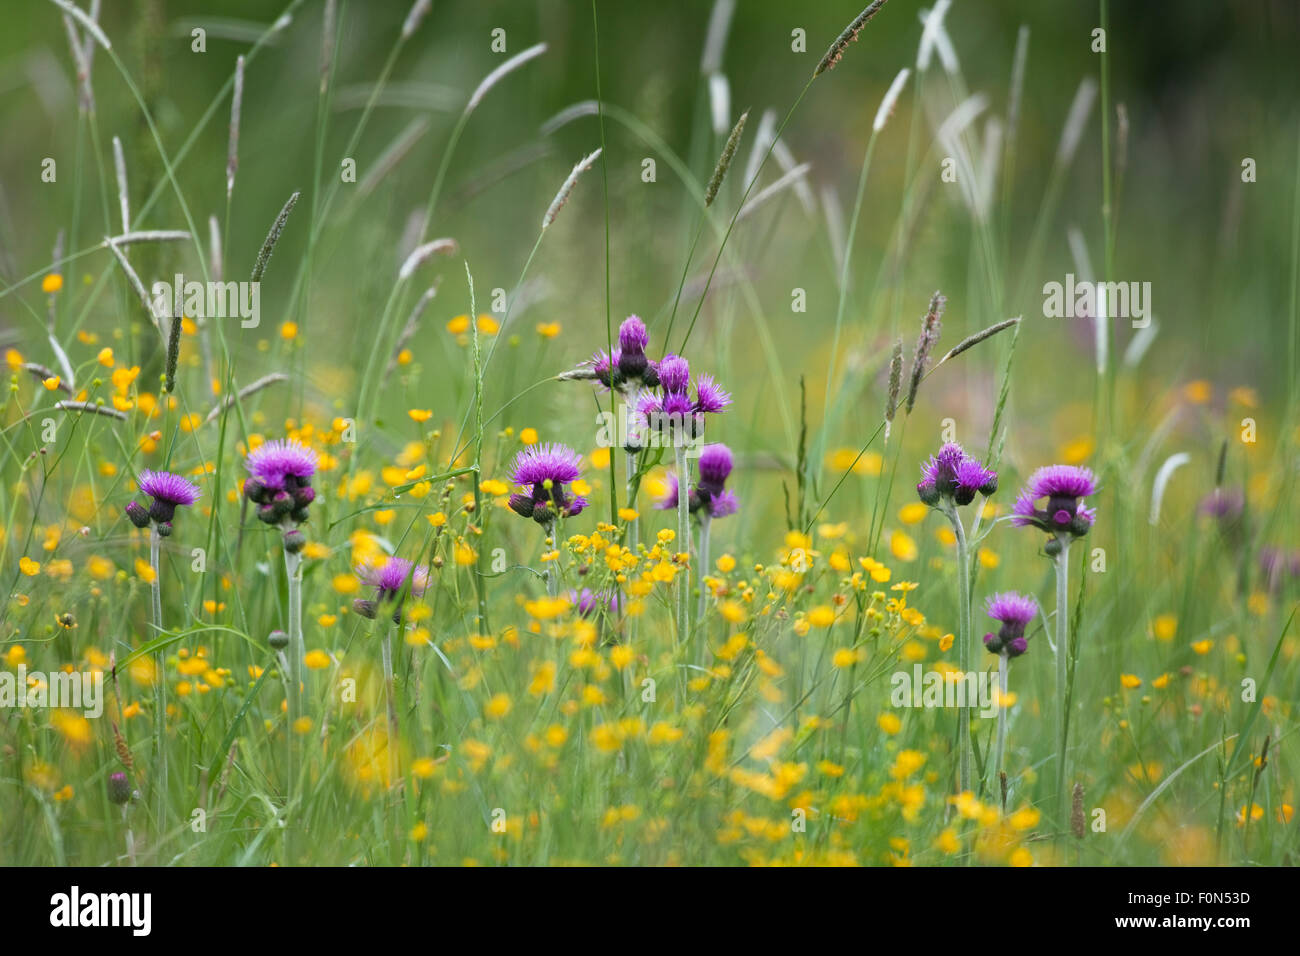 Flowering meadow with Thistles (Cirsium rivulare) and Buttercups (Ranunculus acris) Poloniny National Park, Western Carpathians, Slovakia, Europe, May 2009 Stock Photo